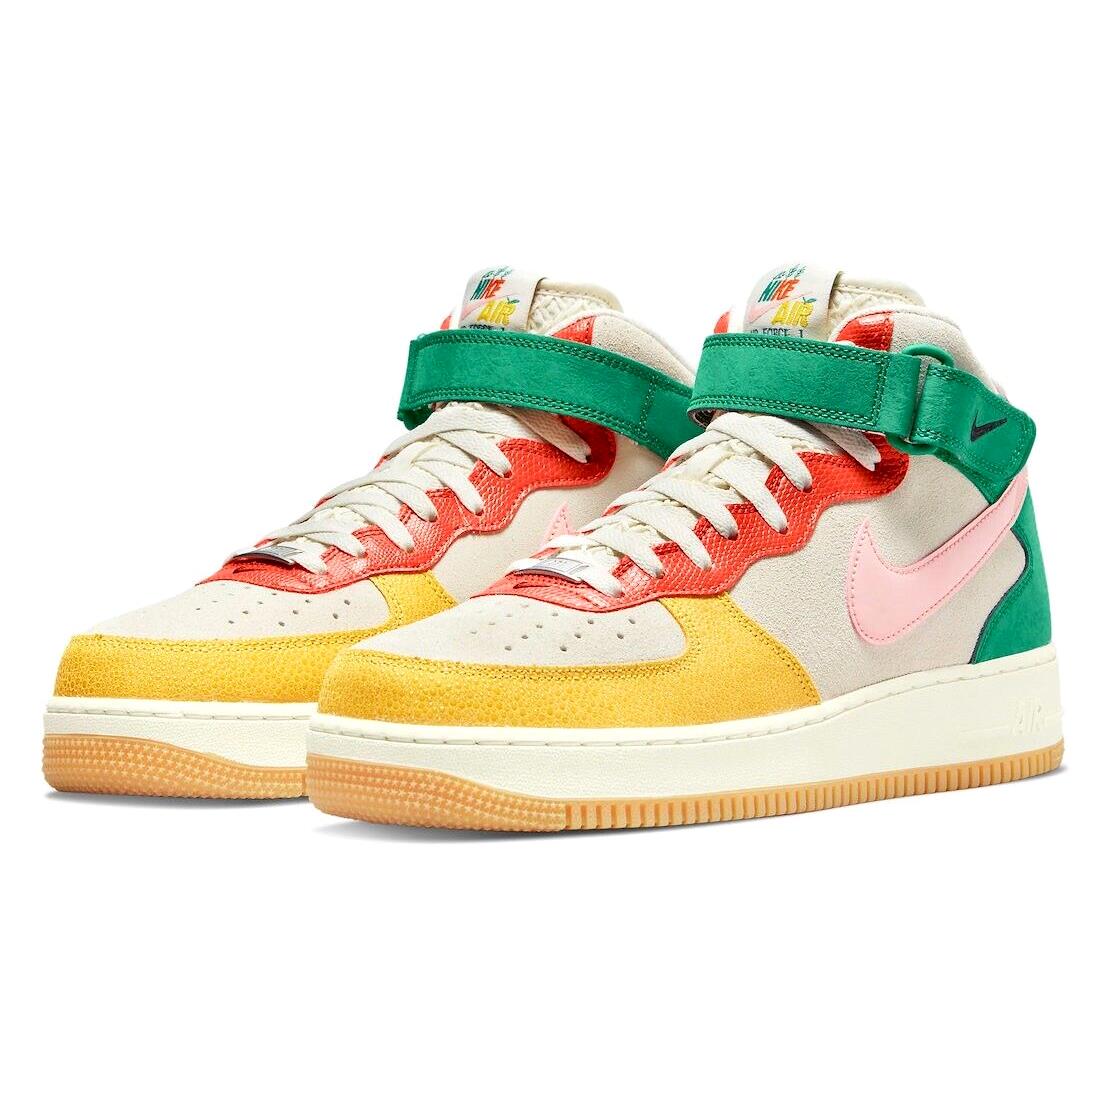 Nike Air Force 1 Mid NH Mens Size 9 Sneaker Shoes DR0158 100 Vivid Sulfur - Multicolor